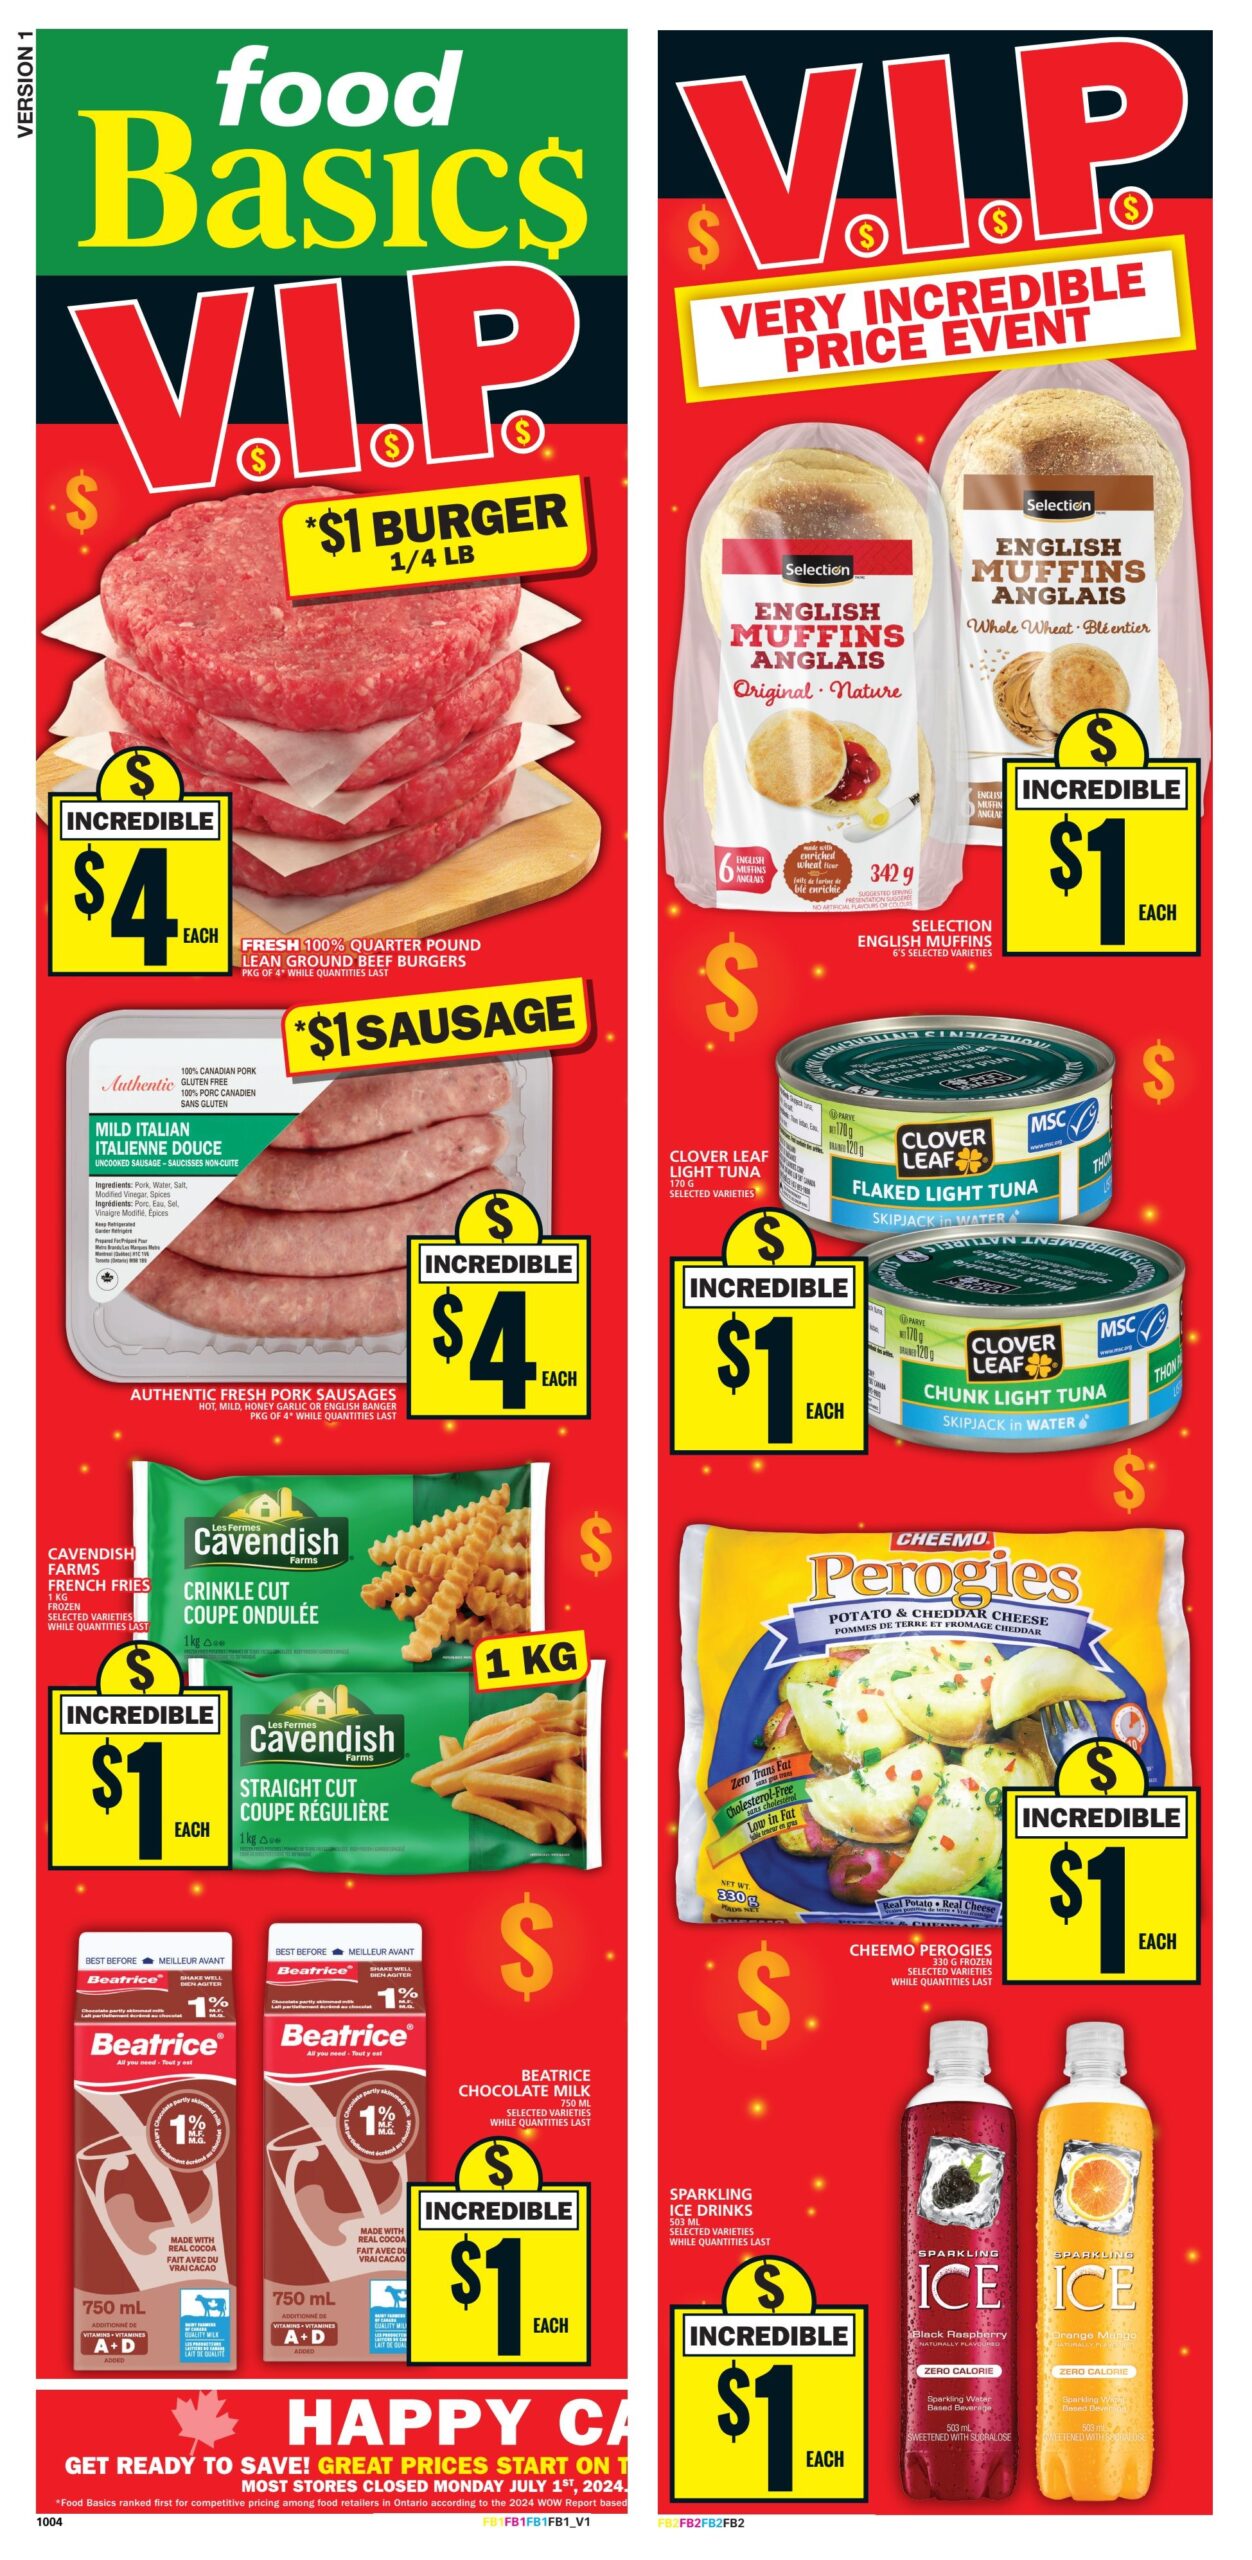 food basics flyer june 27 to july 3 1 scaled